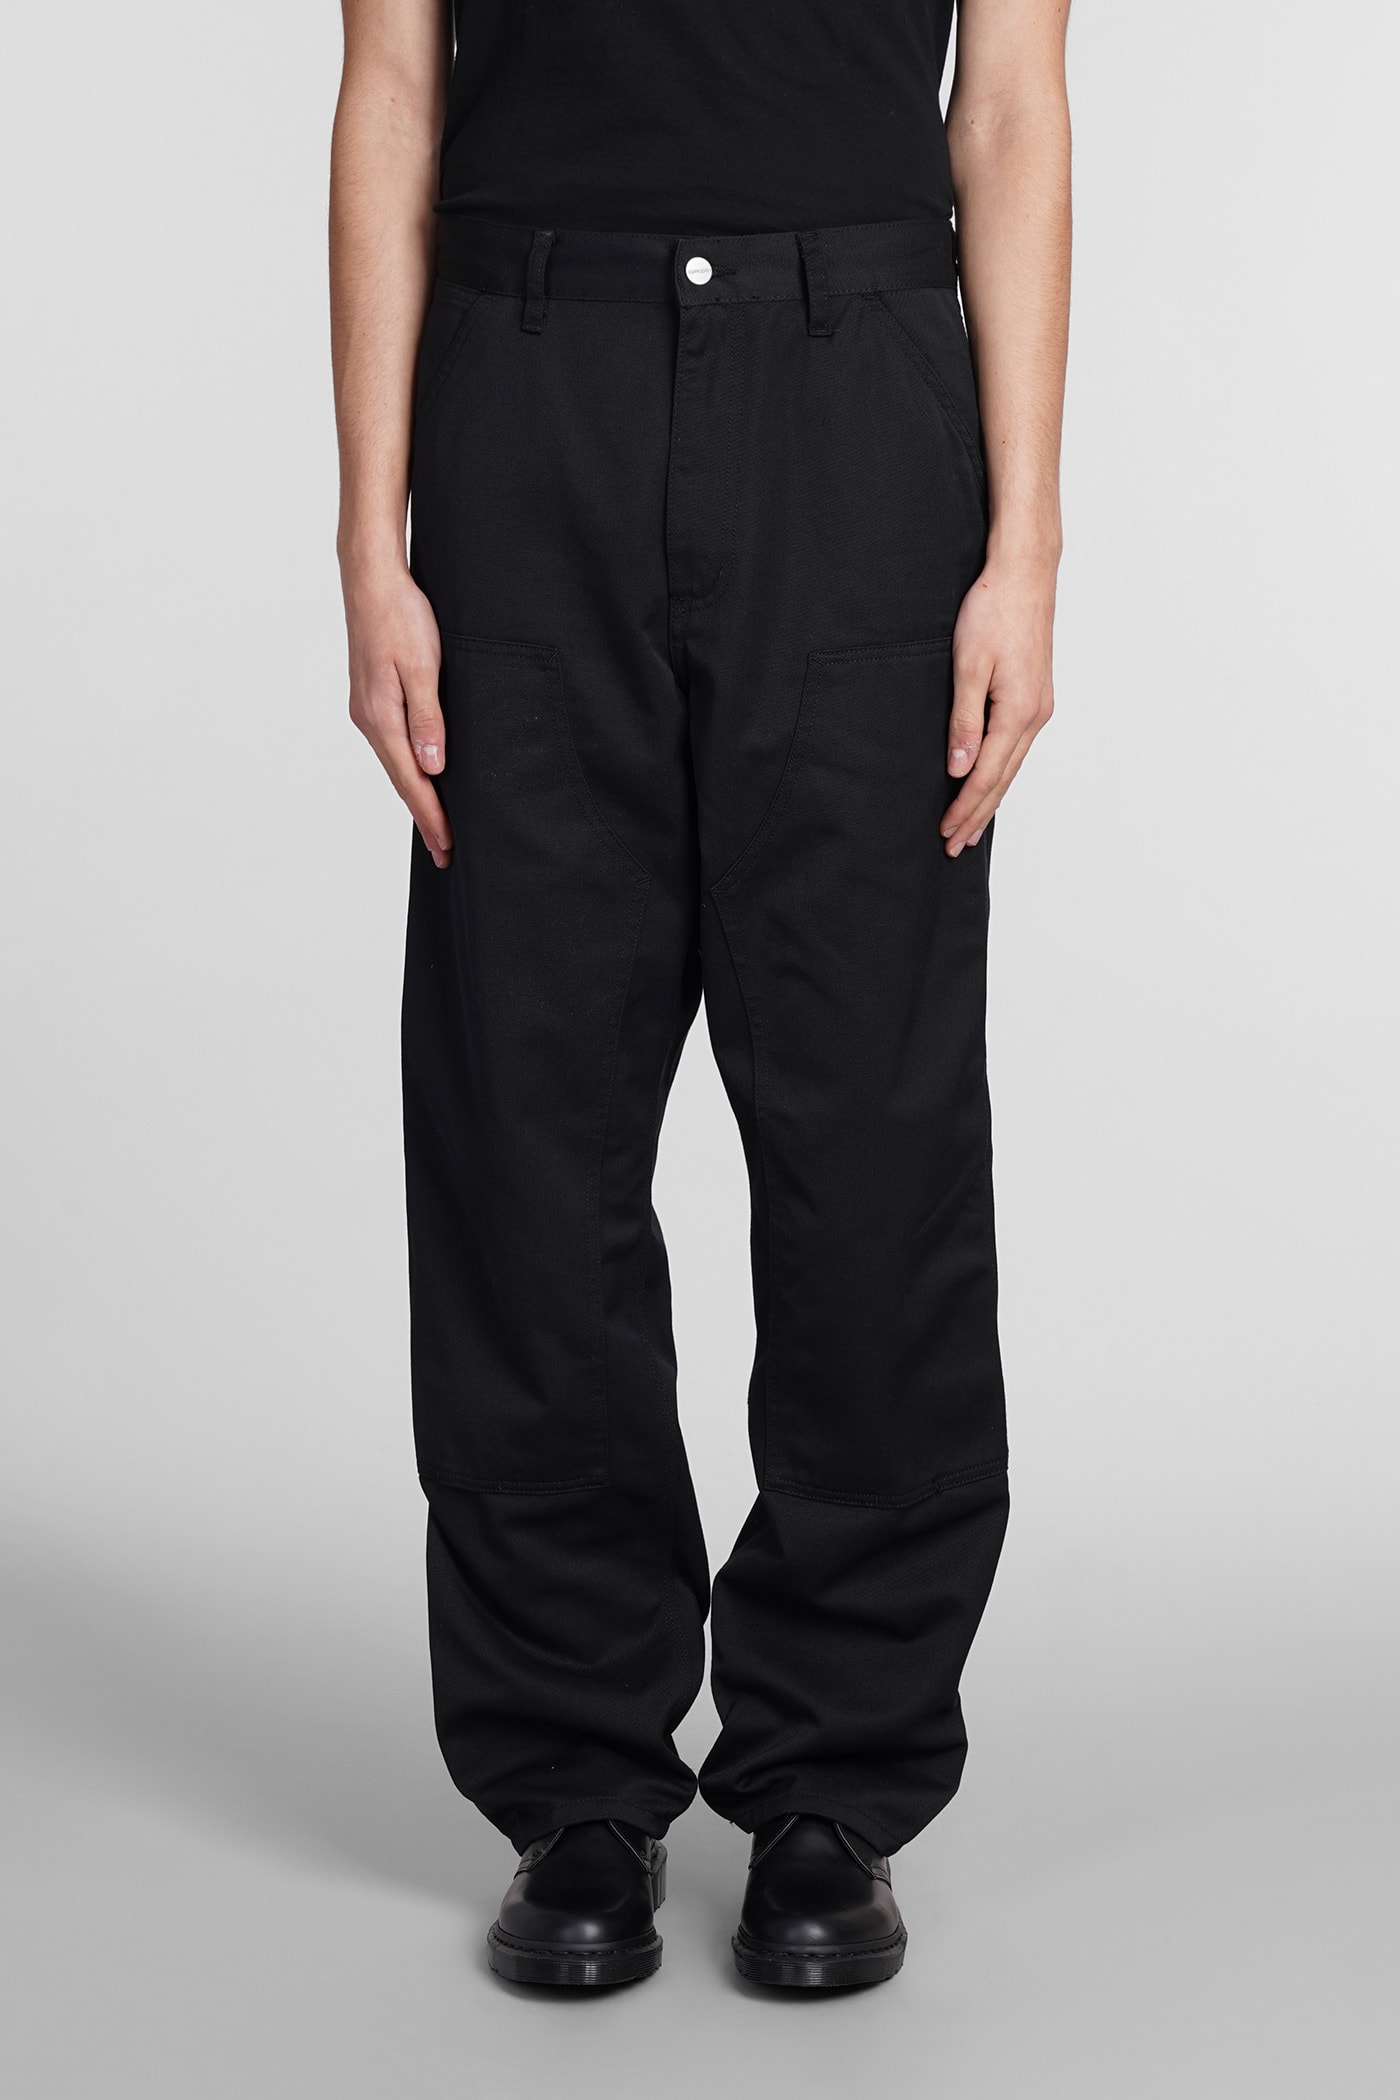 Carhartt Pants In Black Polyester